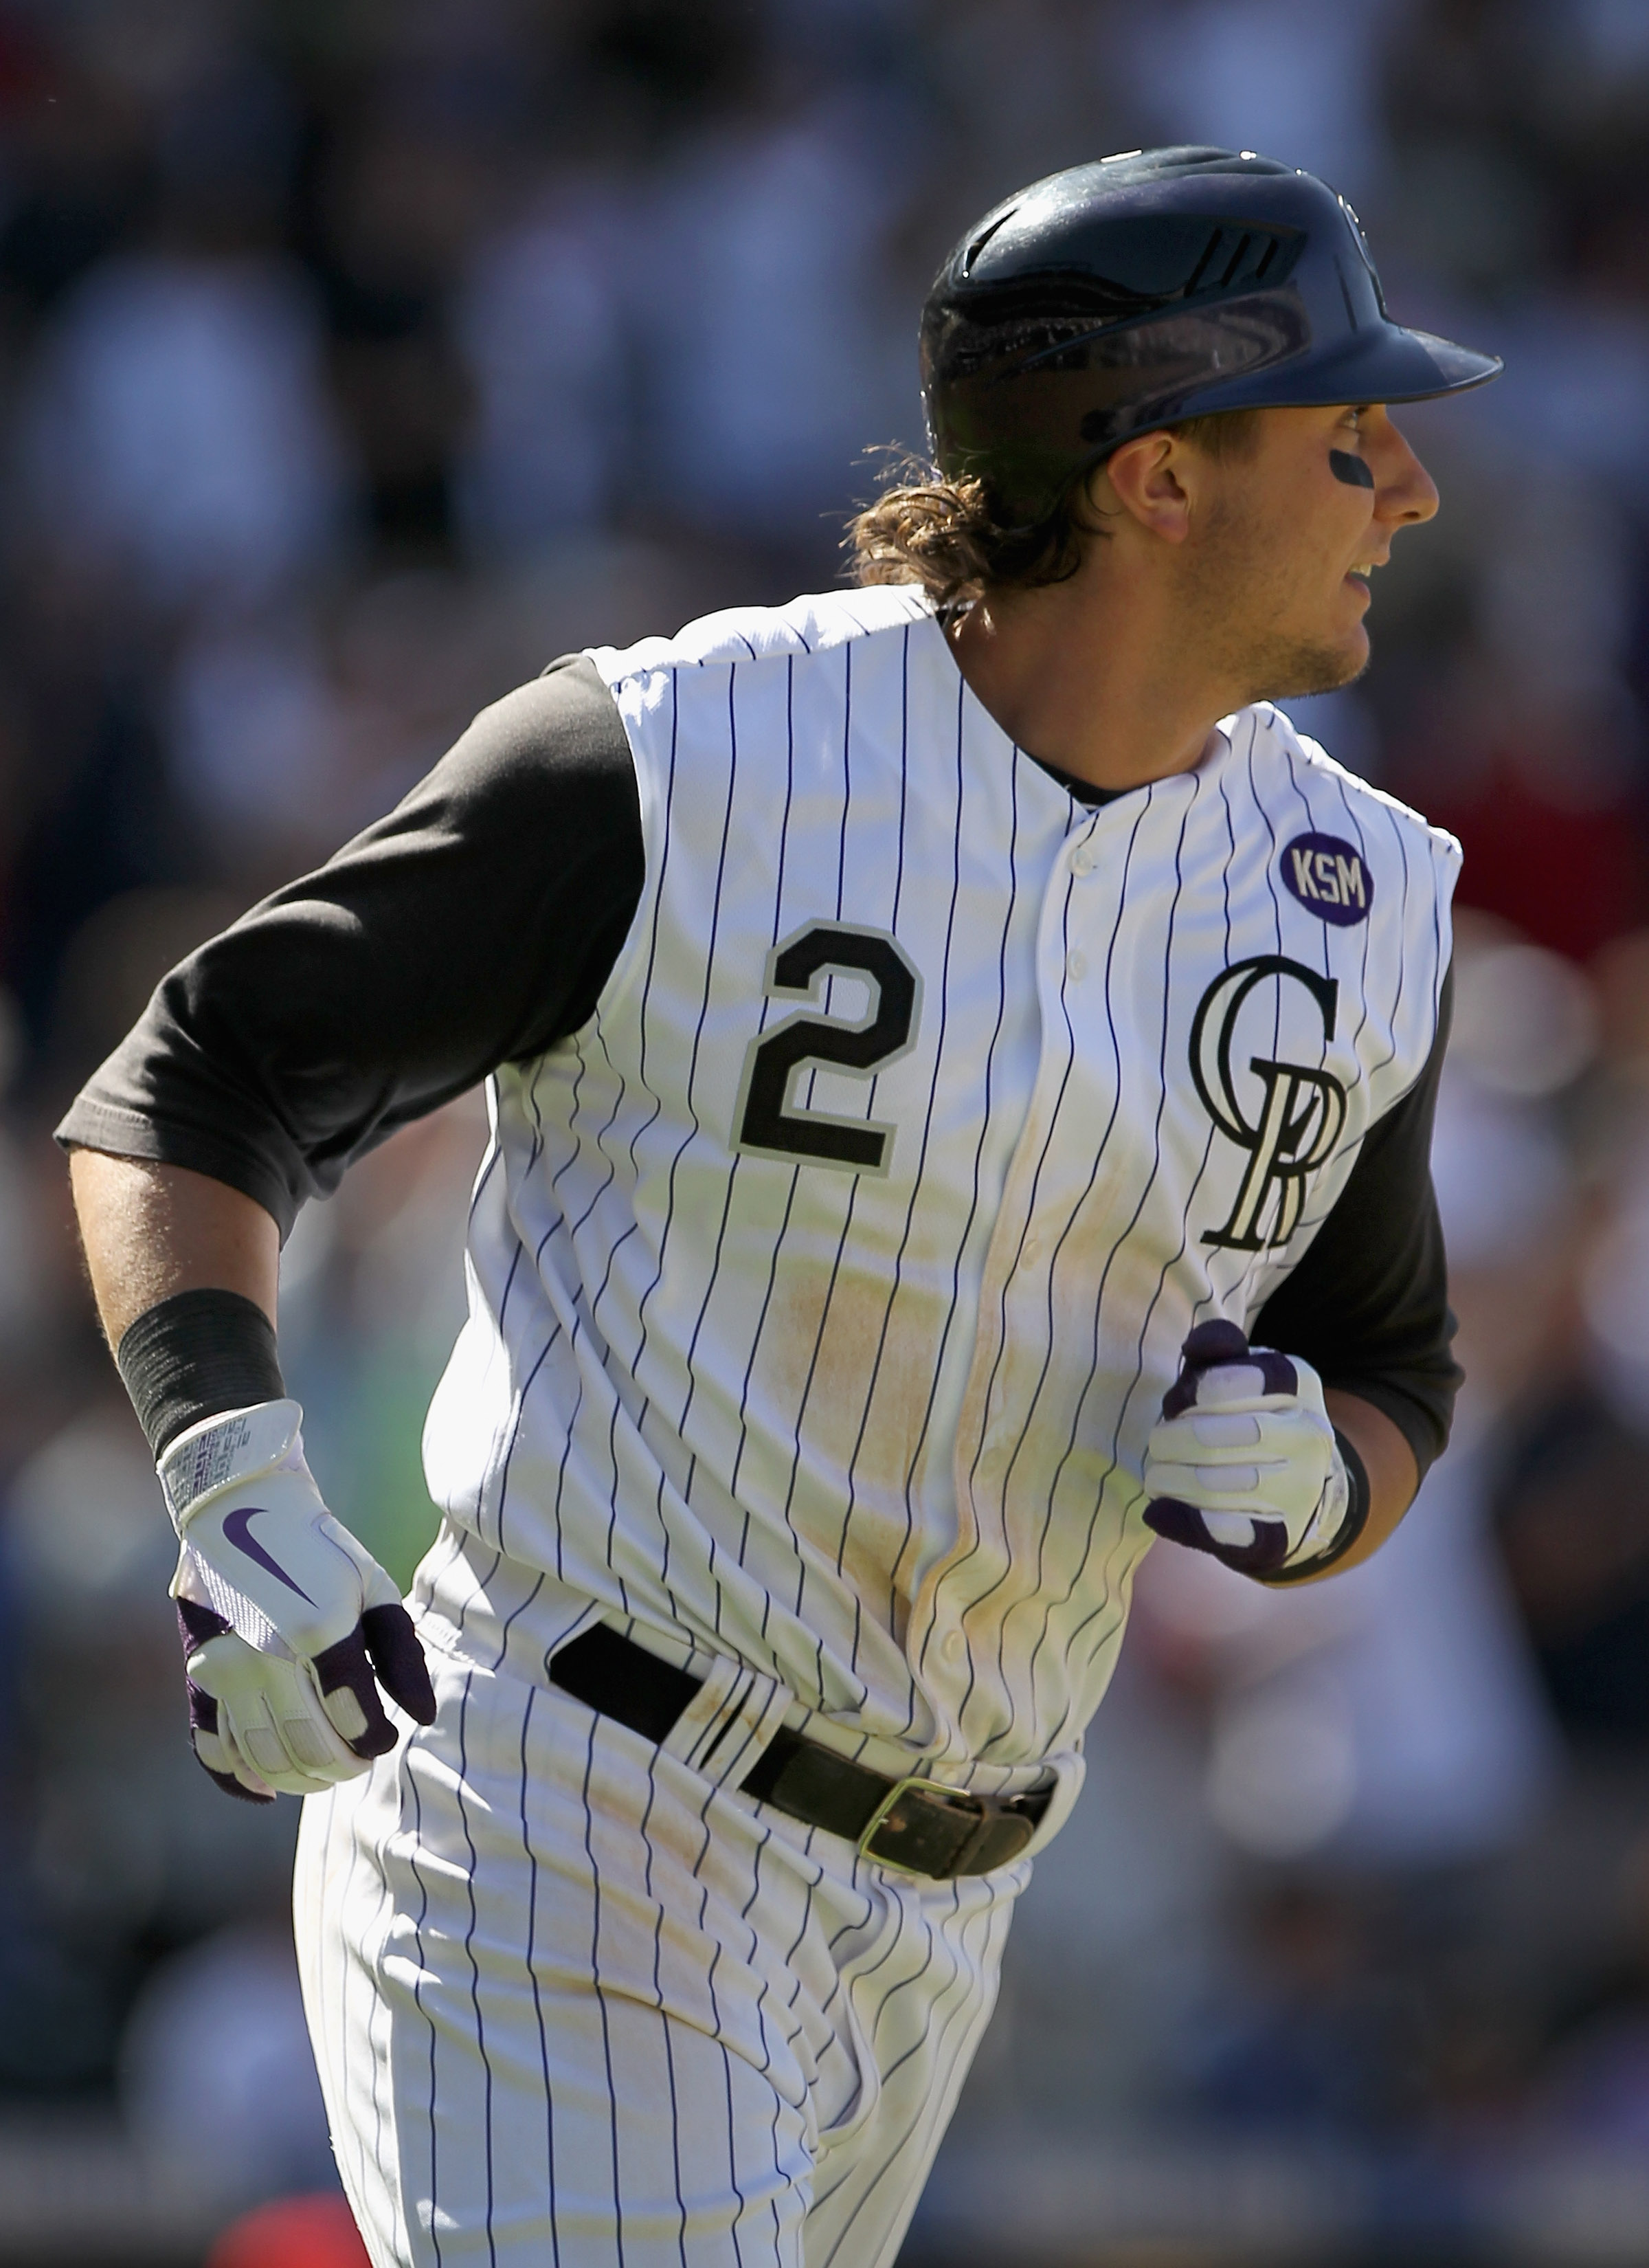 Rockies spell All-Star shortstop Troy Tulowitzki's name wrong on